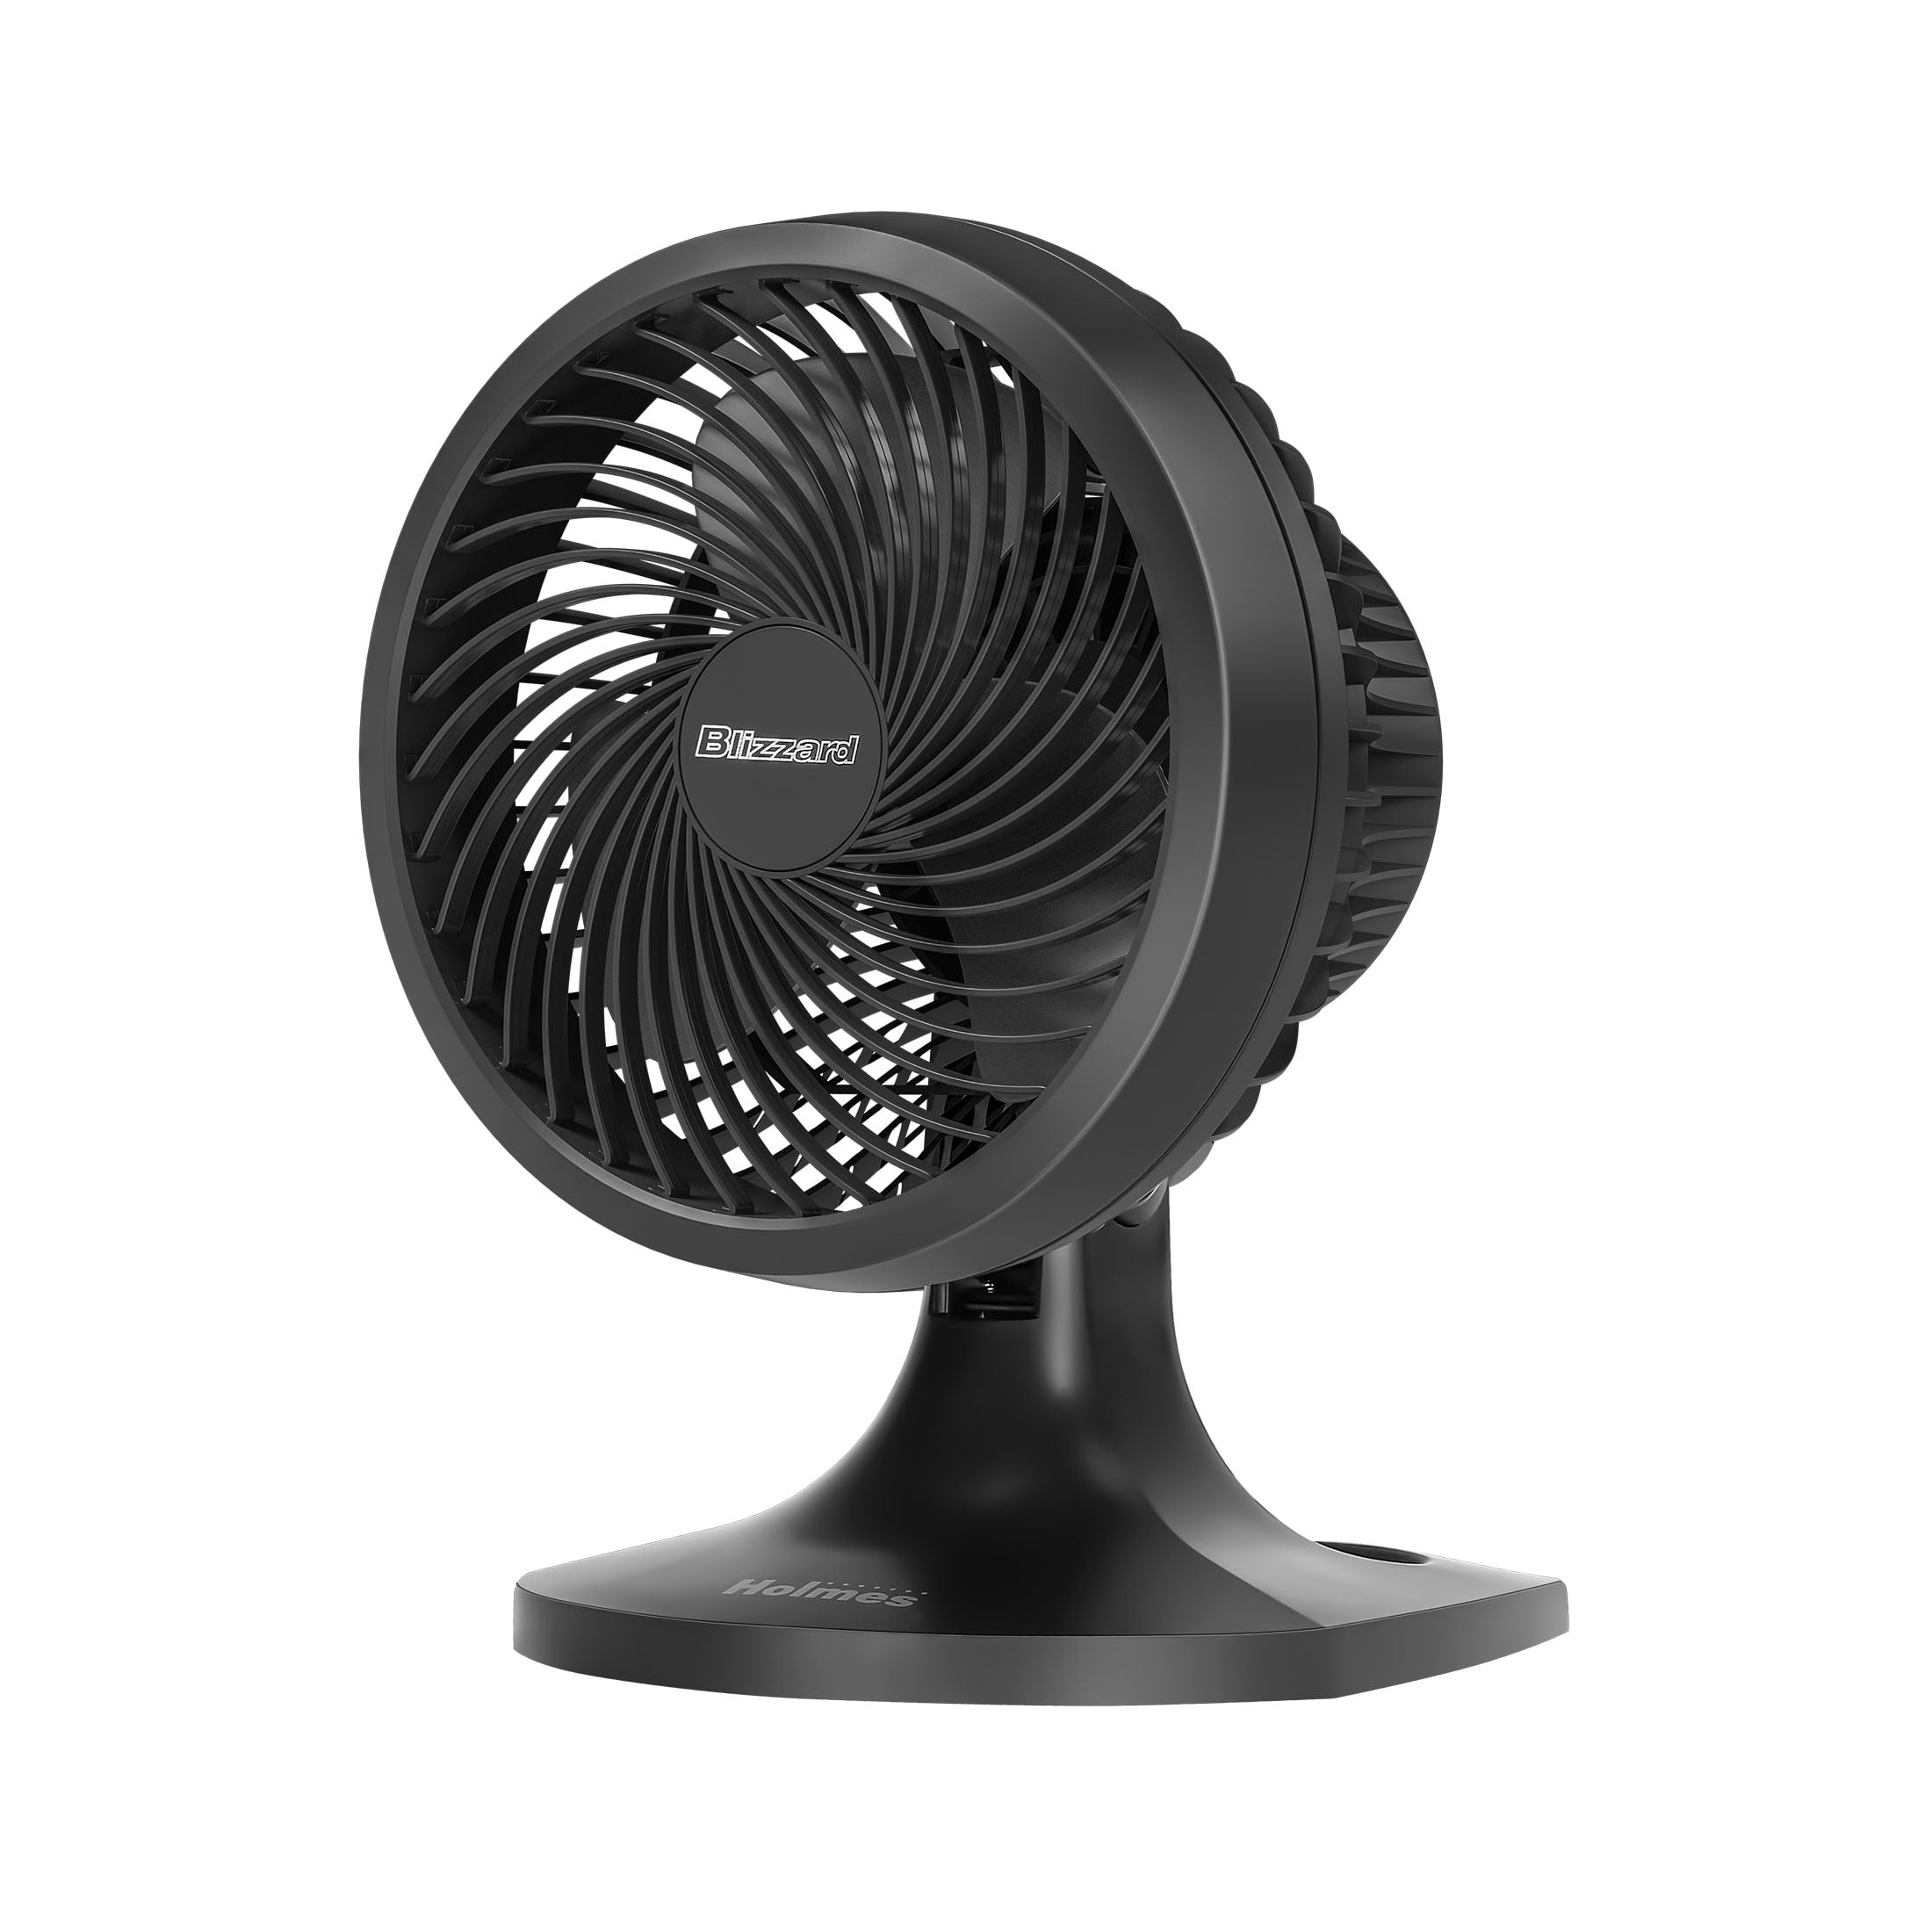 9" Holmes Blizzard 3-Speed Oscillating Table Fan (Charcoal) $11.98 + Free Shipping w/ Walmart+ or on $35+